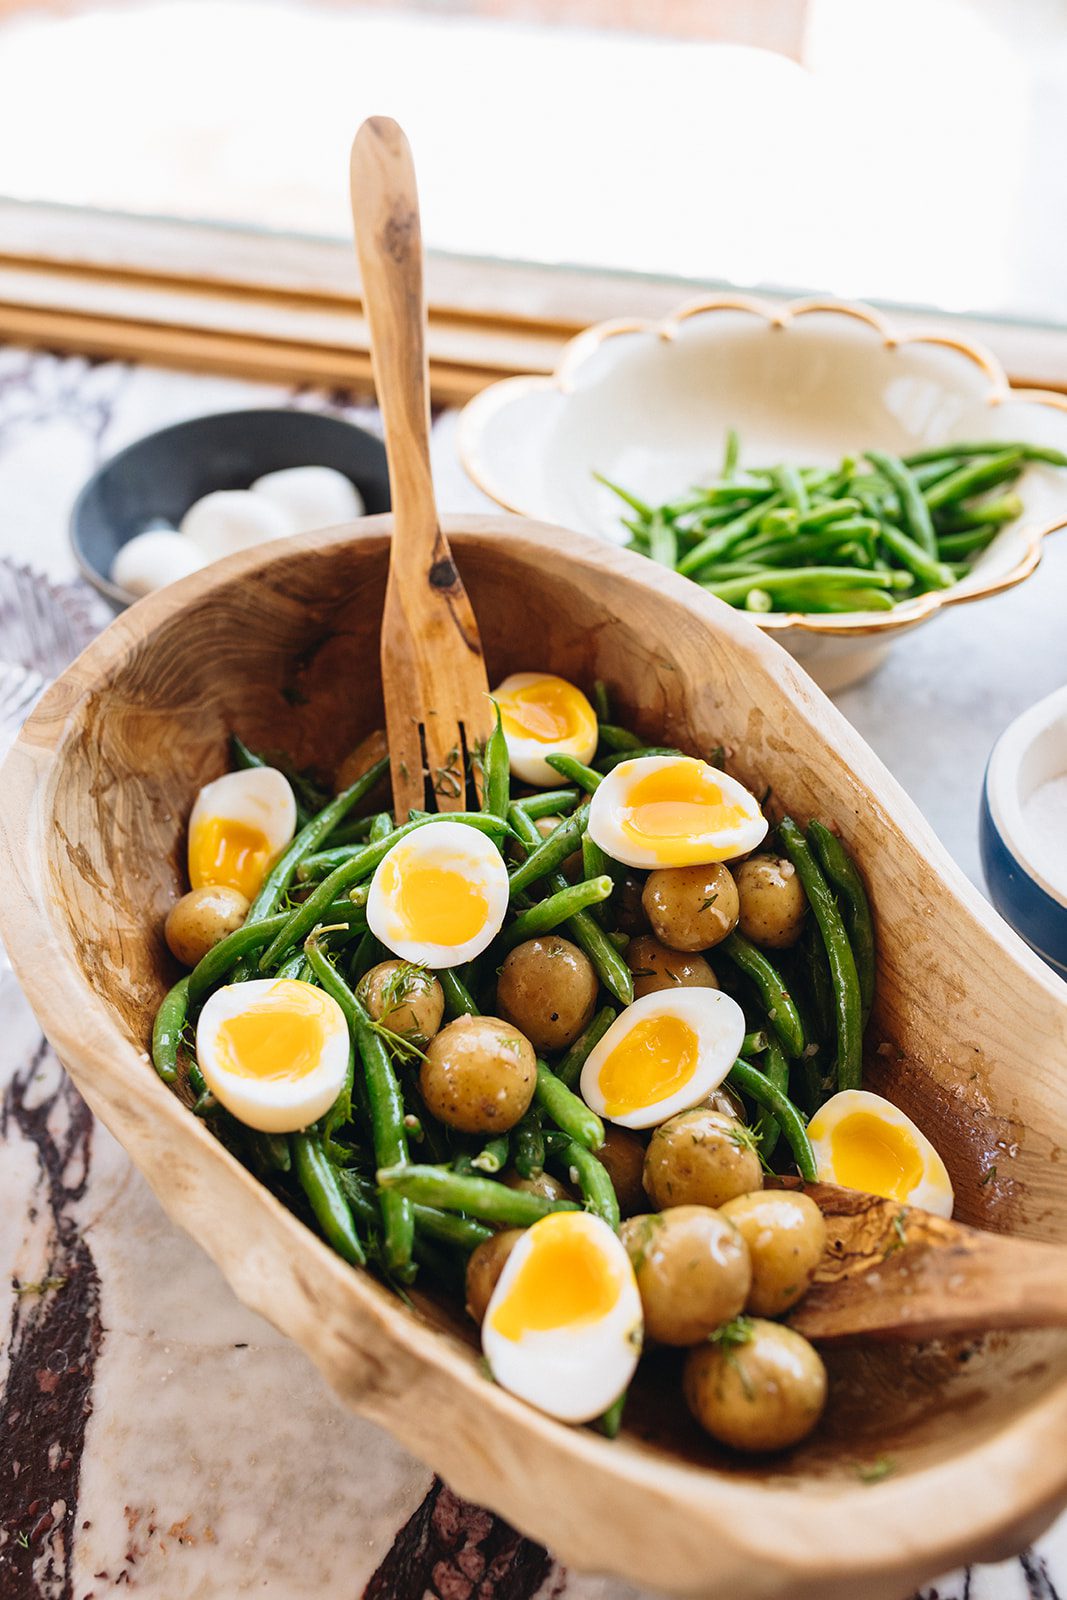 French green bean potato salad with medium-boiled eggs in a wood serving bowl on a marble countertop.